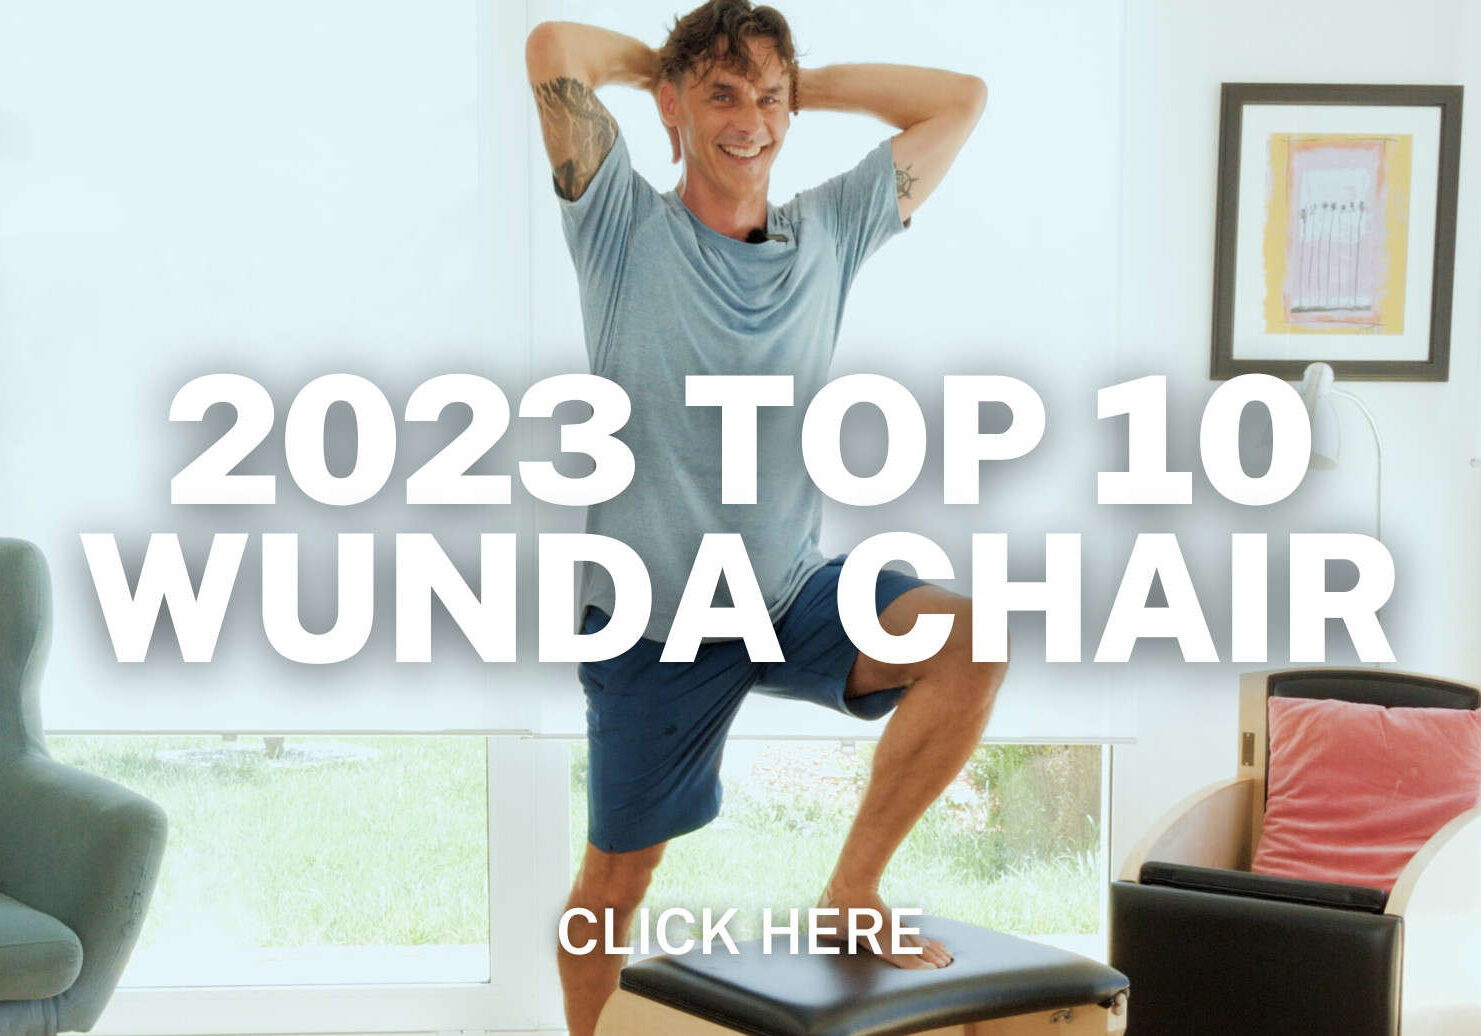 Click here for 2023 Top 10 Wunda Chair